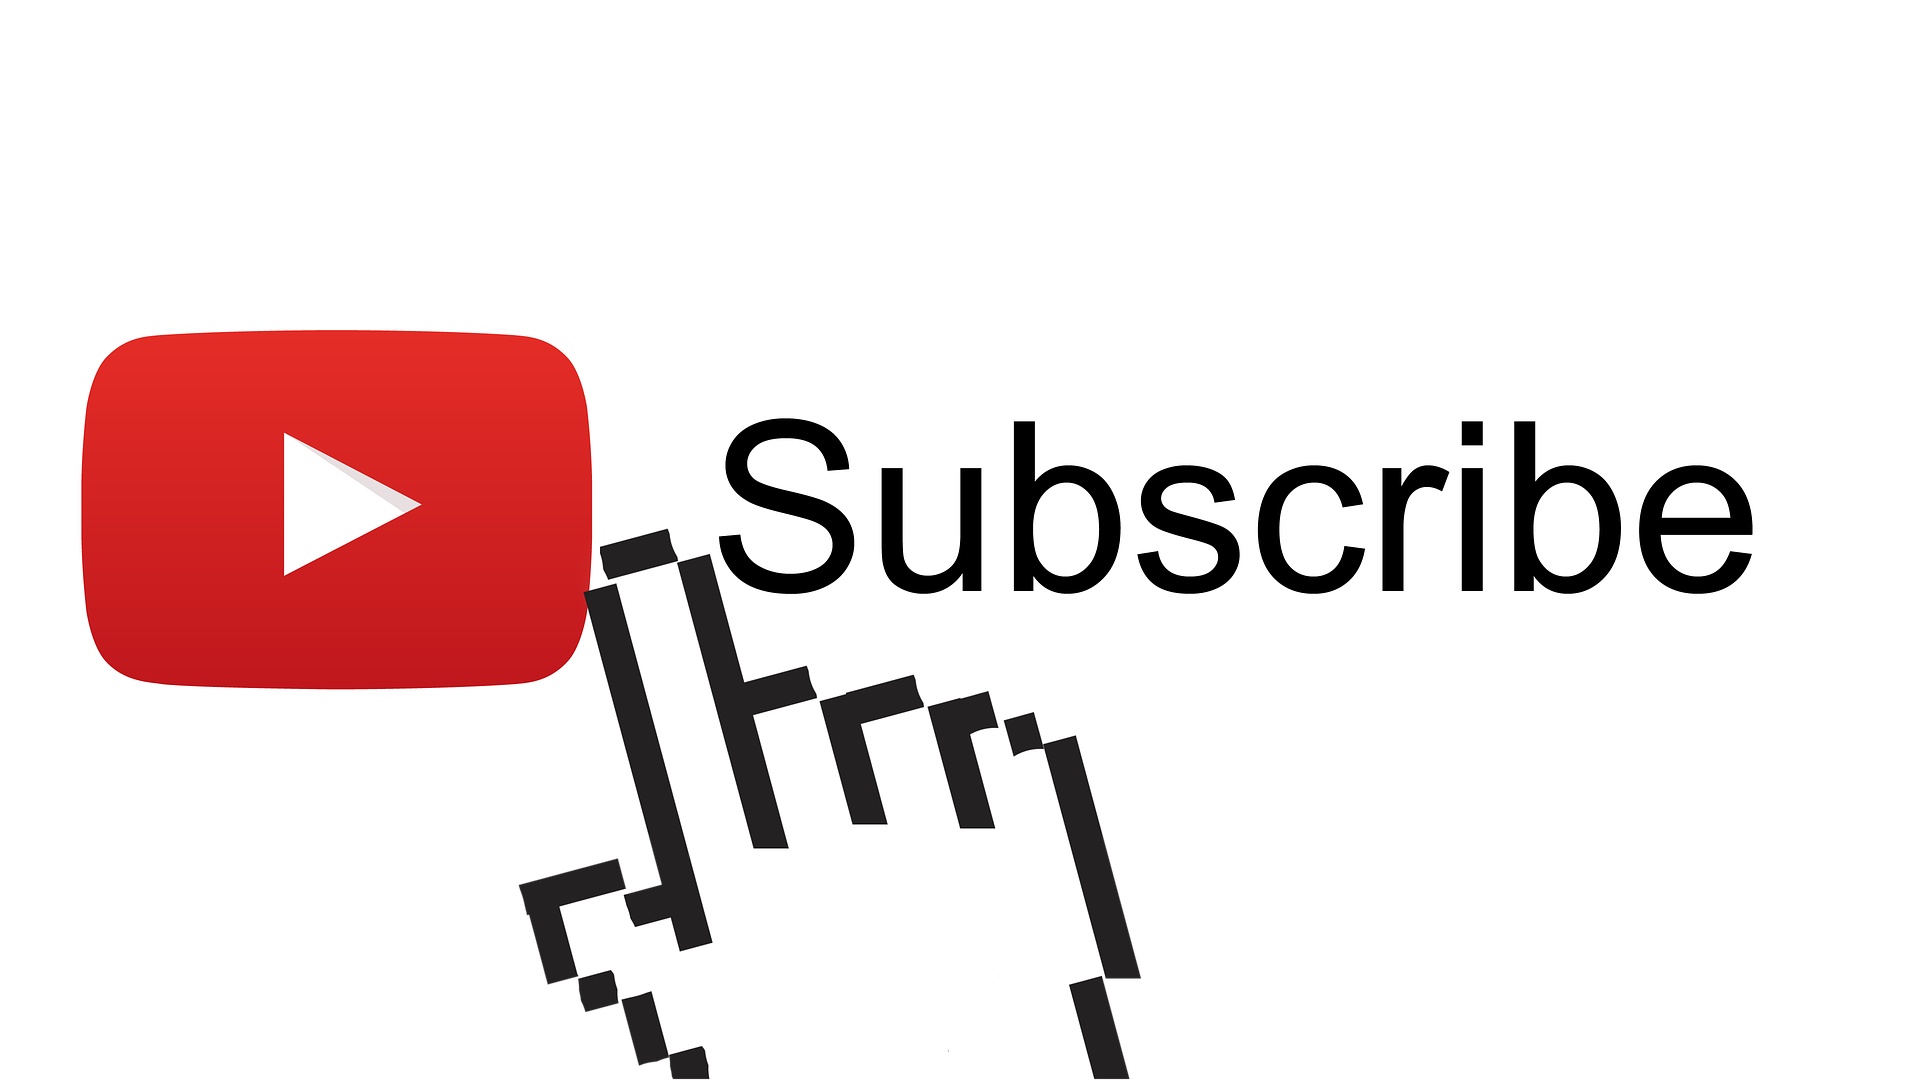 Subscribe Youtube Wallpapers - Wallpaper Cave